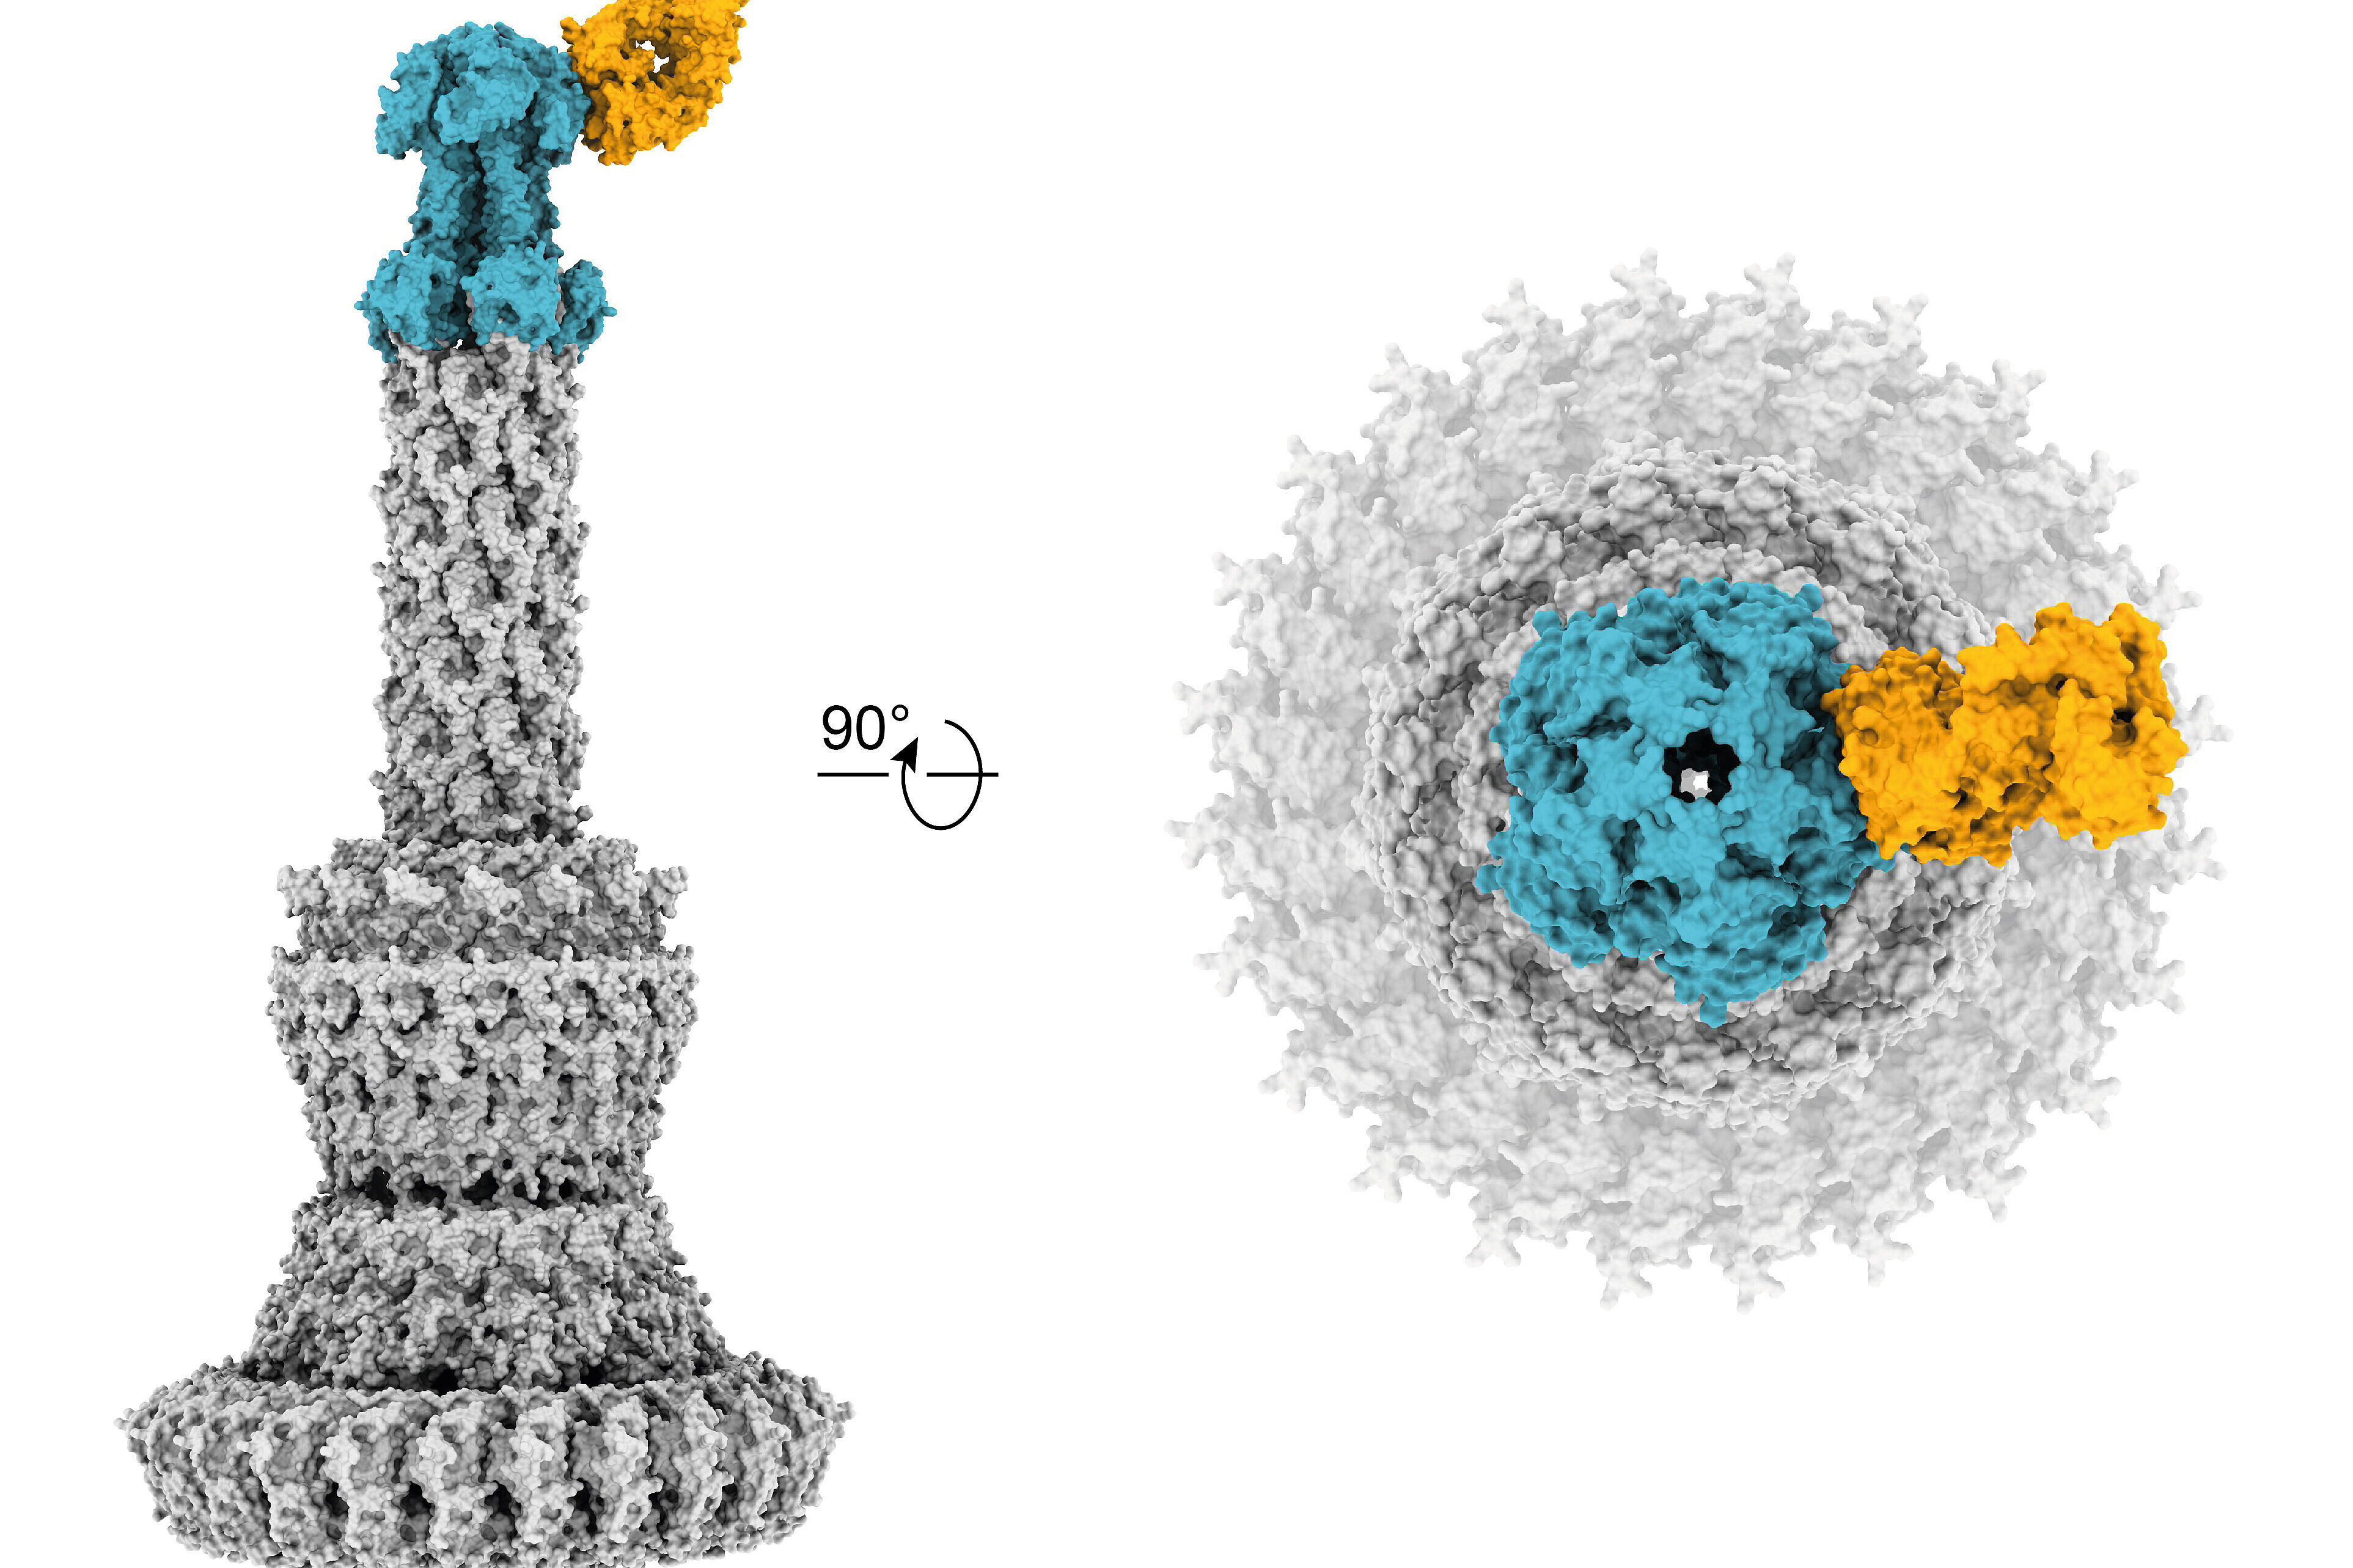 Graphic of Cryo-electron microscope reconstruction of the antigen binding region